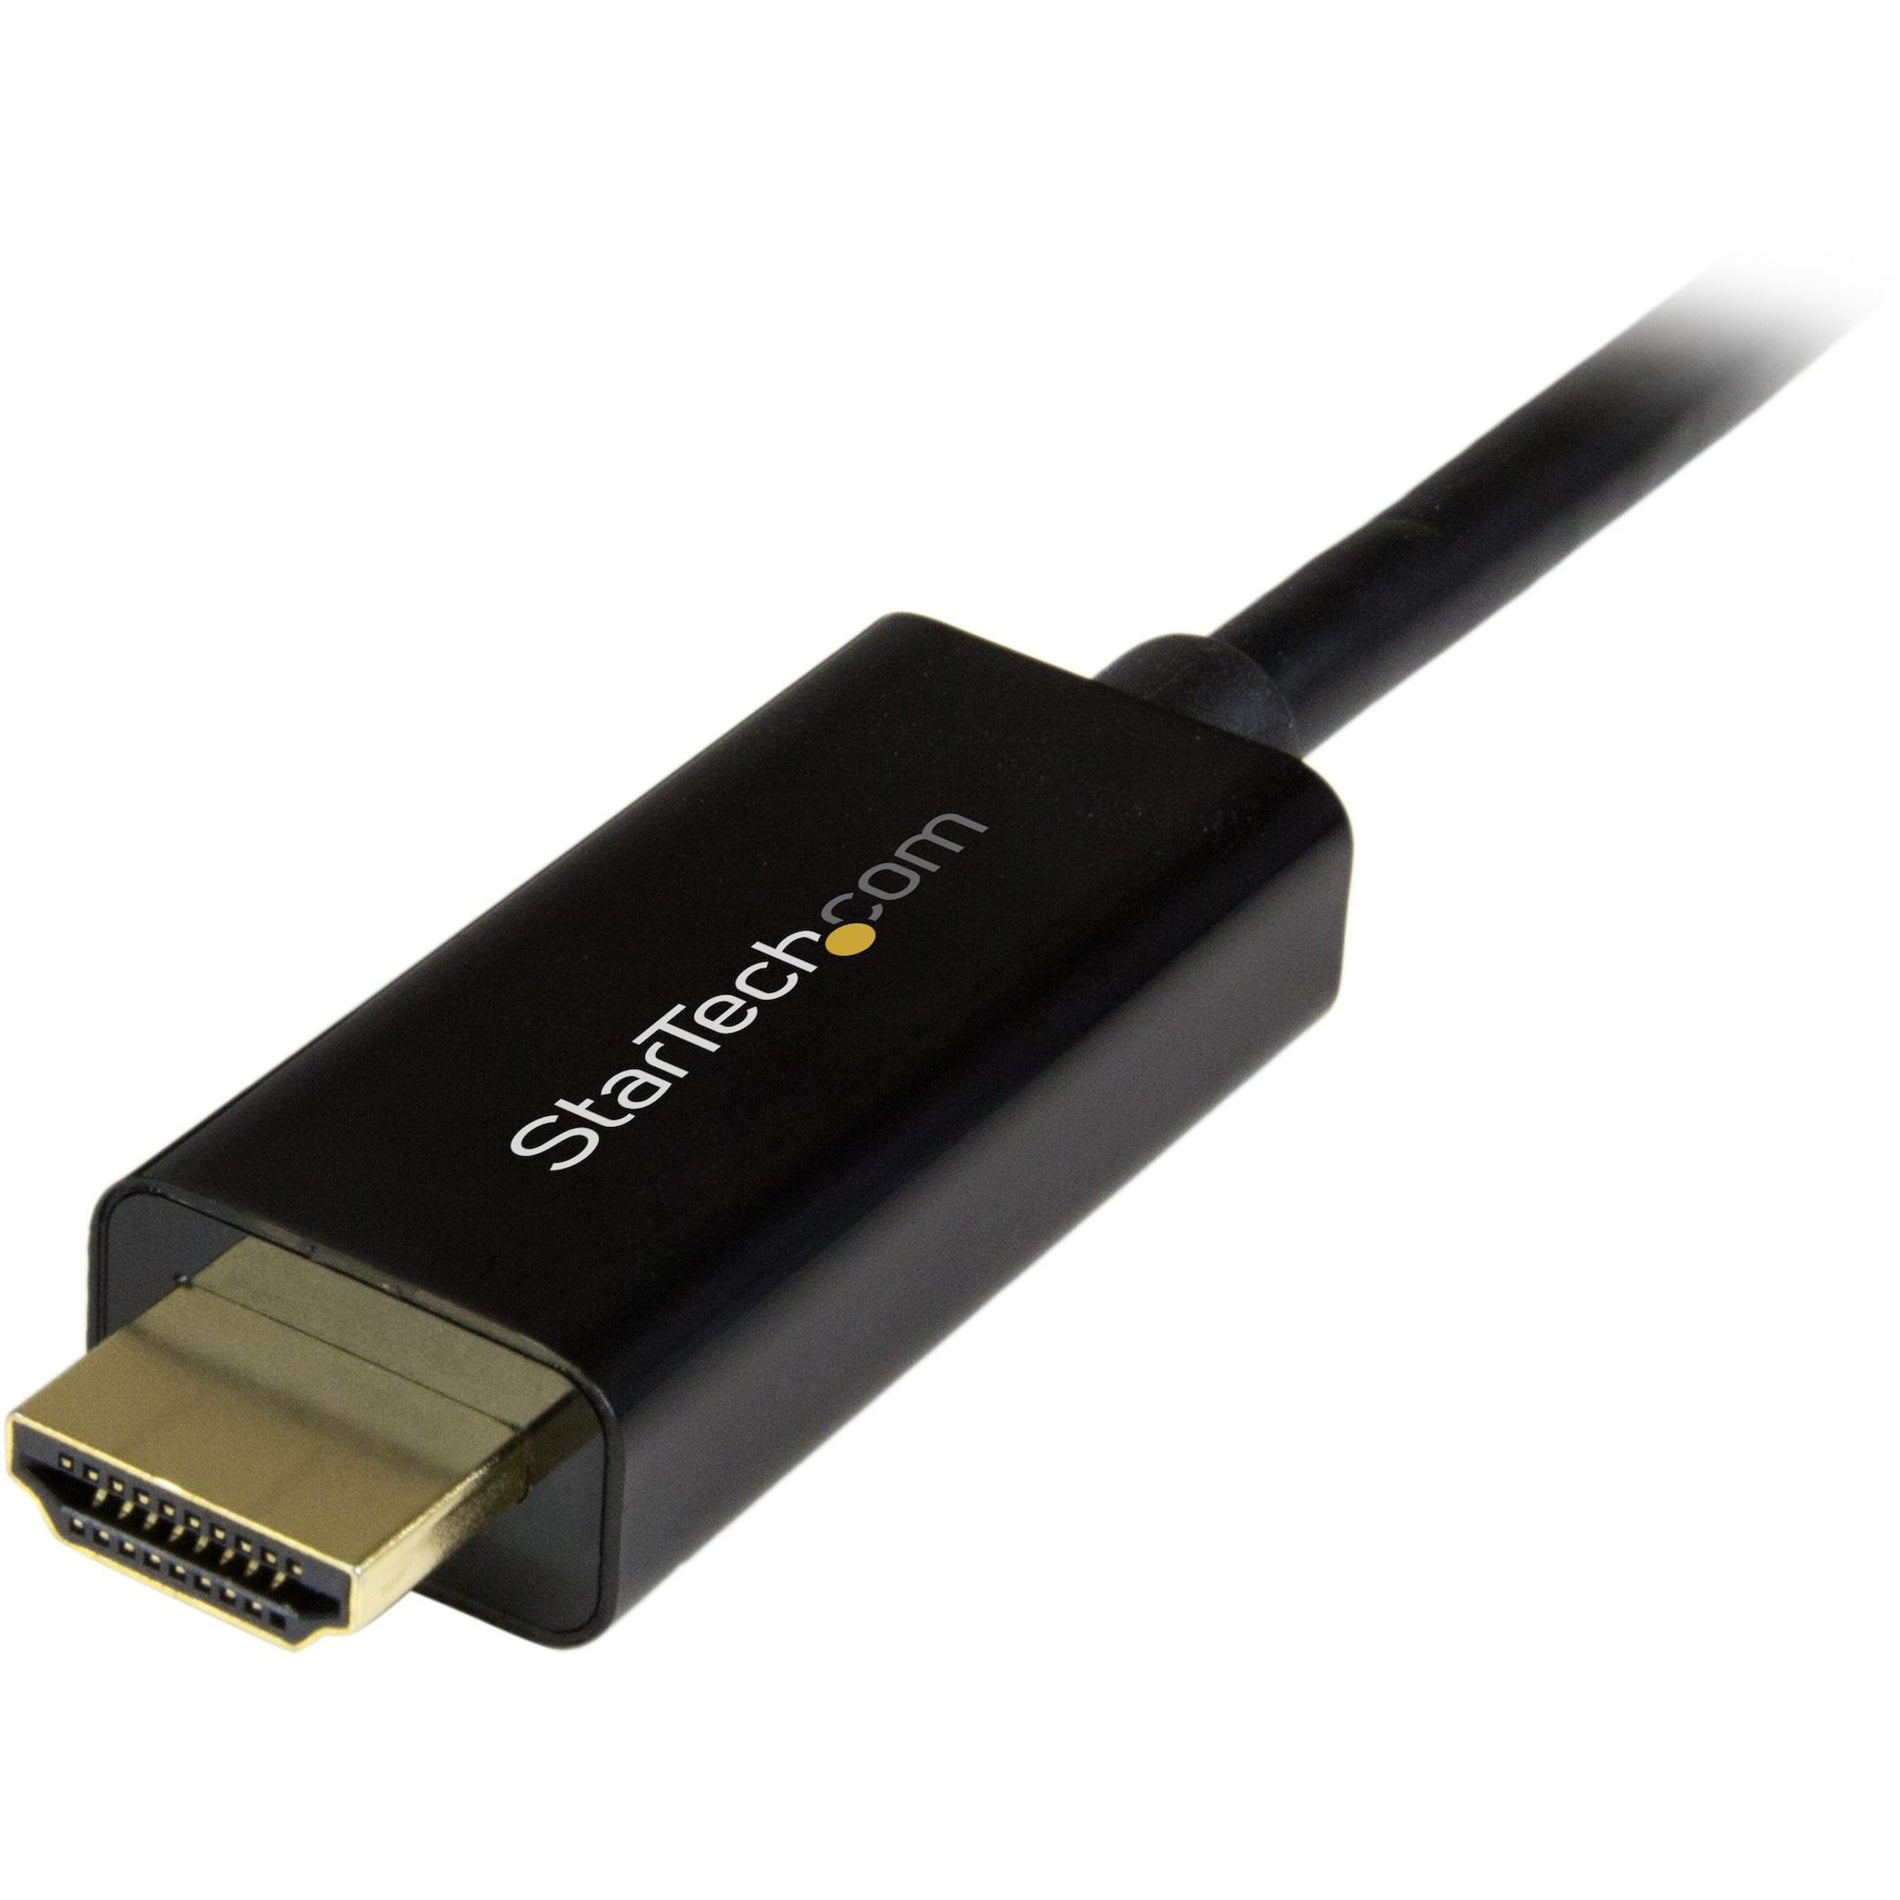 StarTech.com DP2HDMM1MB DisplayPort to HDMI Converter Cable 4K, 3 ft - Flexible, HDCP 1.4